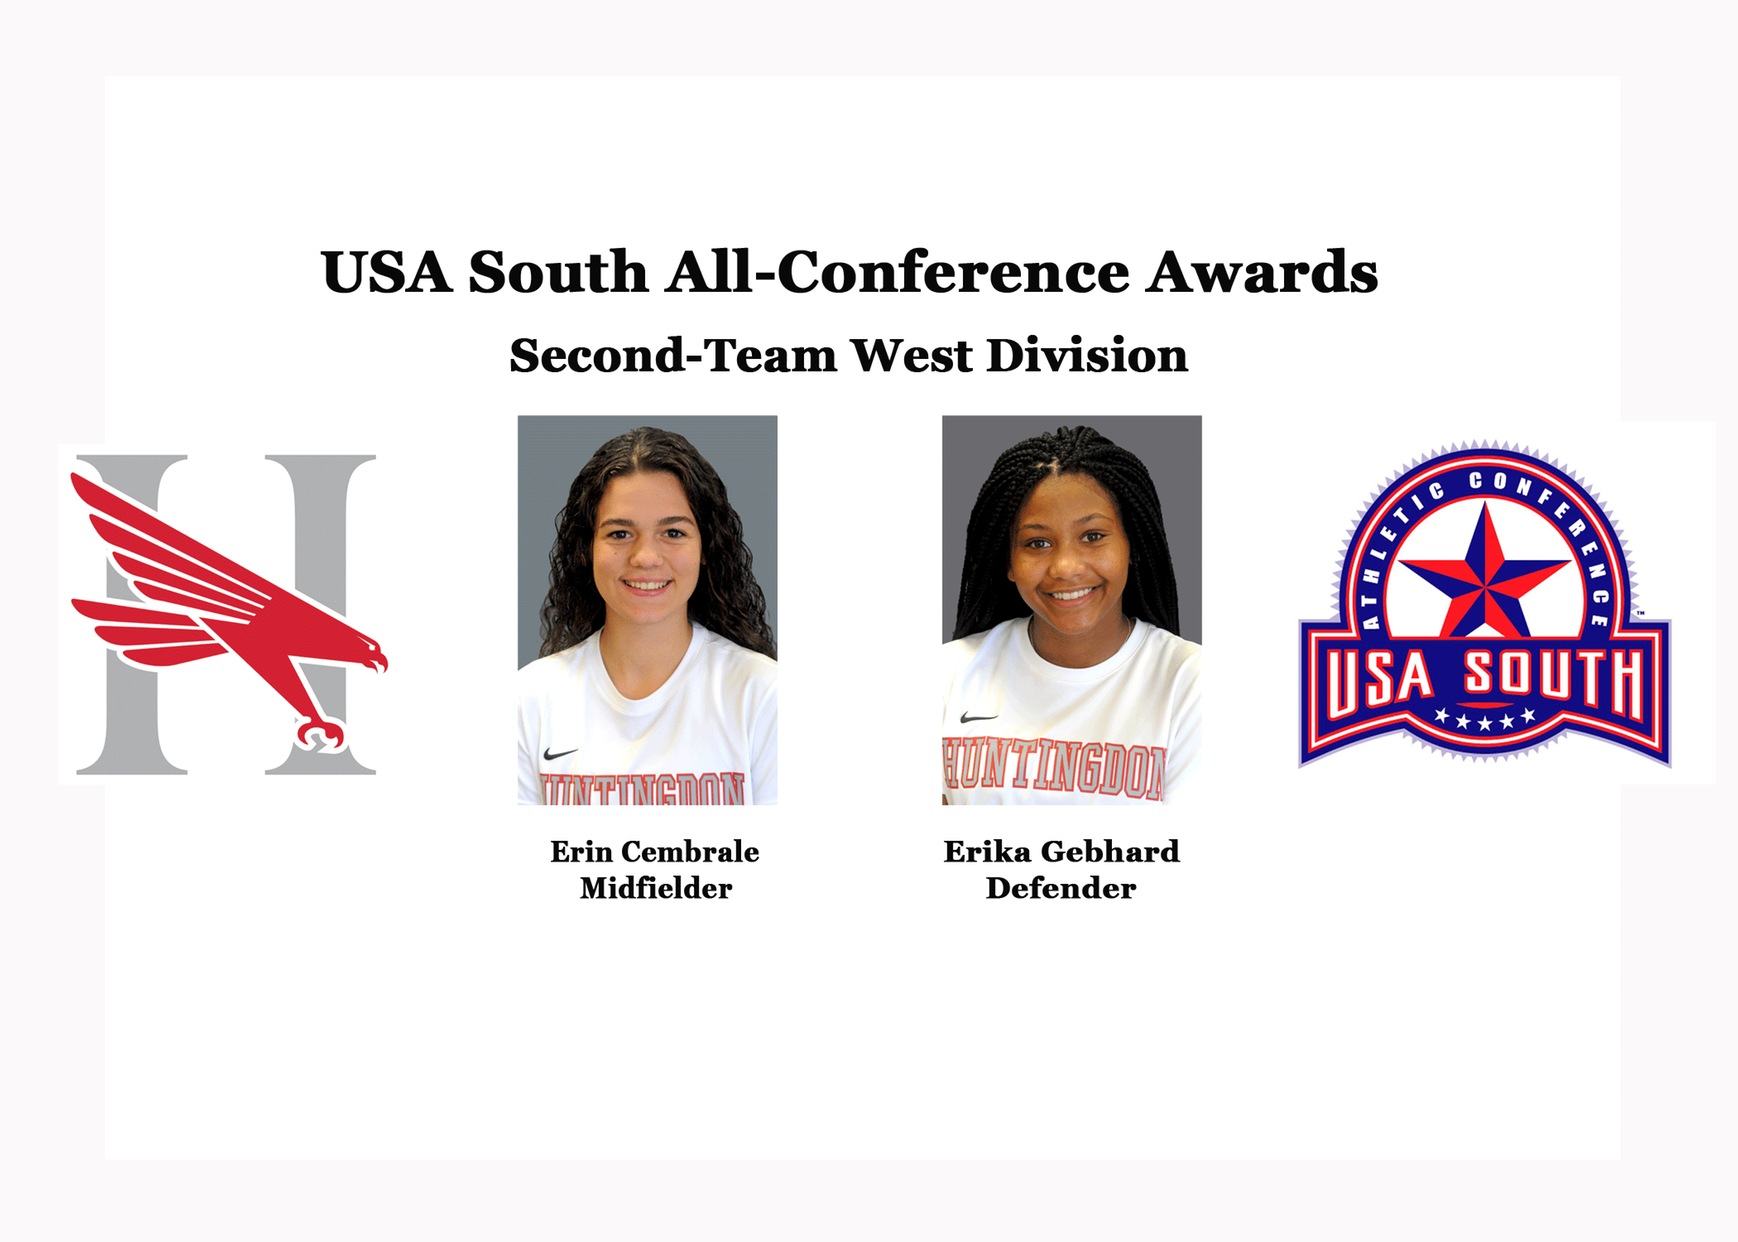 Cembrale and Gebhard earn second-team West Division honors from USA South